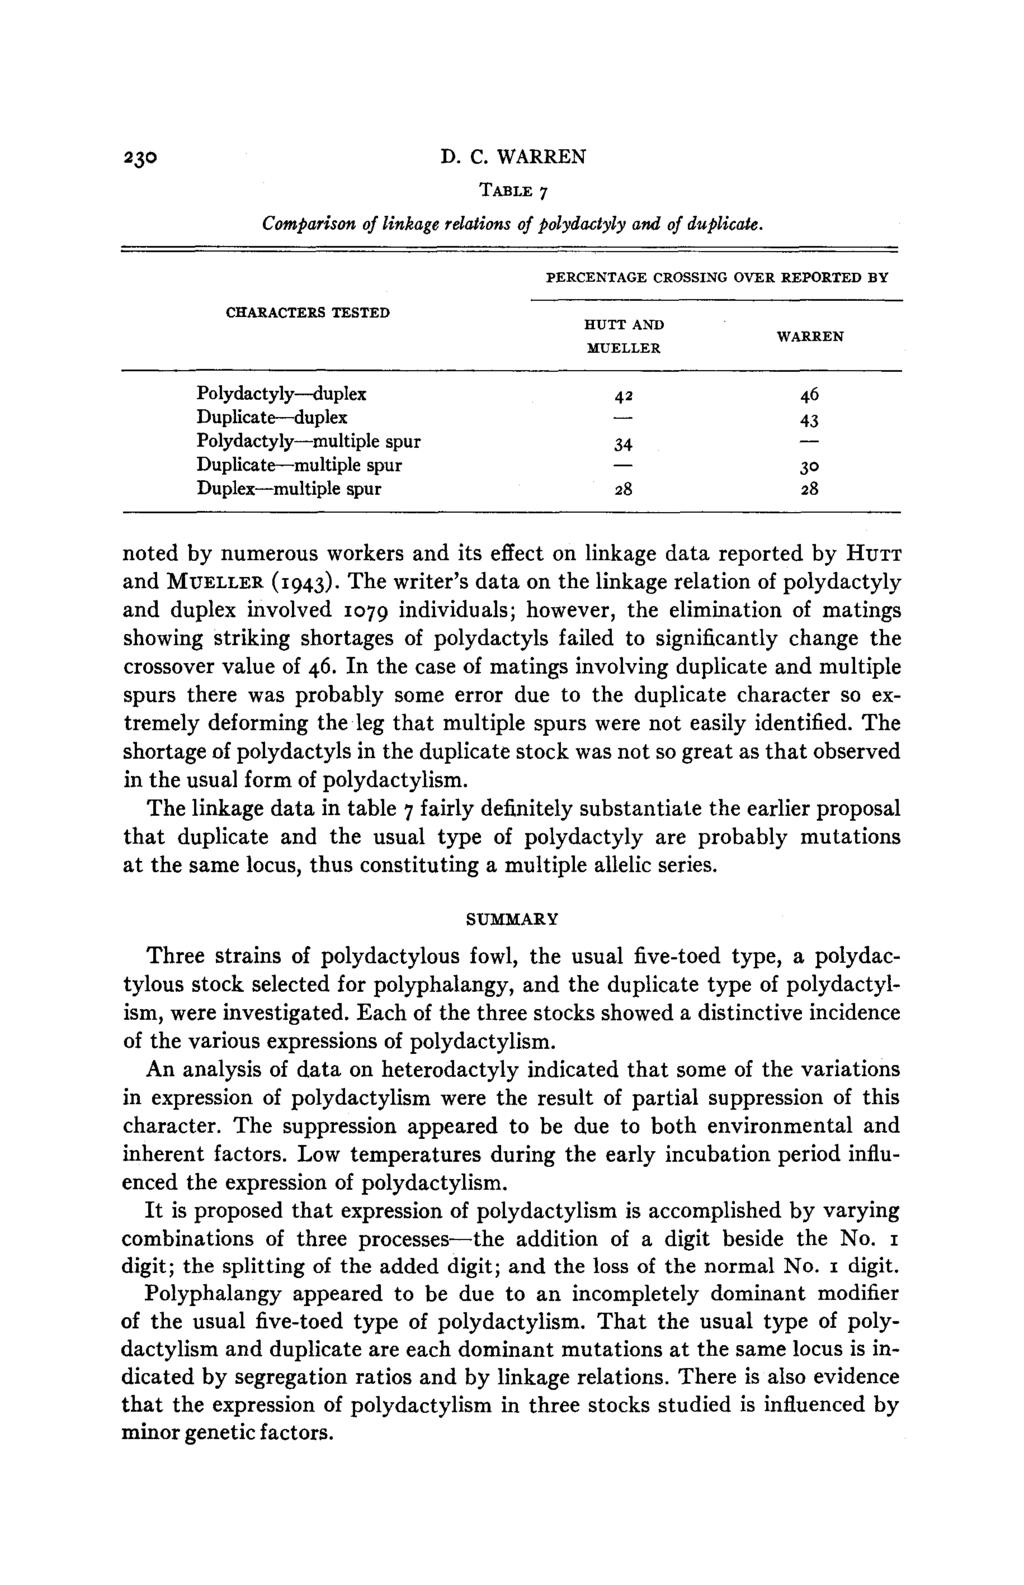 230 D. C. WARREN TABLE 7 Comparison of linkage relations of polydactyly and of duplicate.